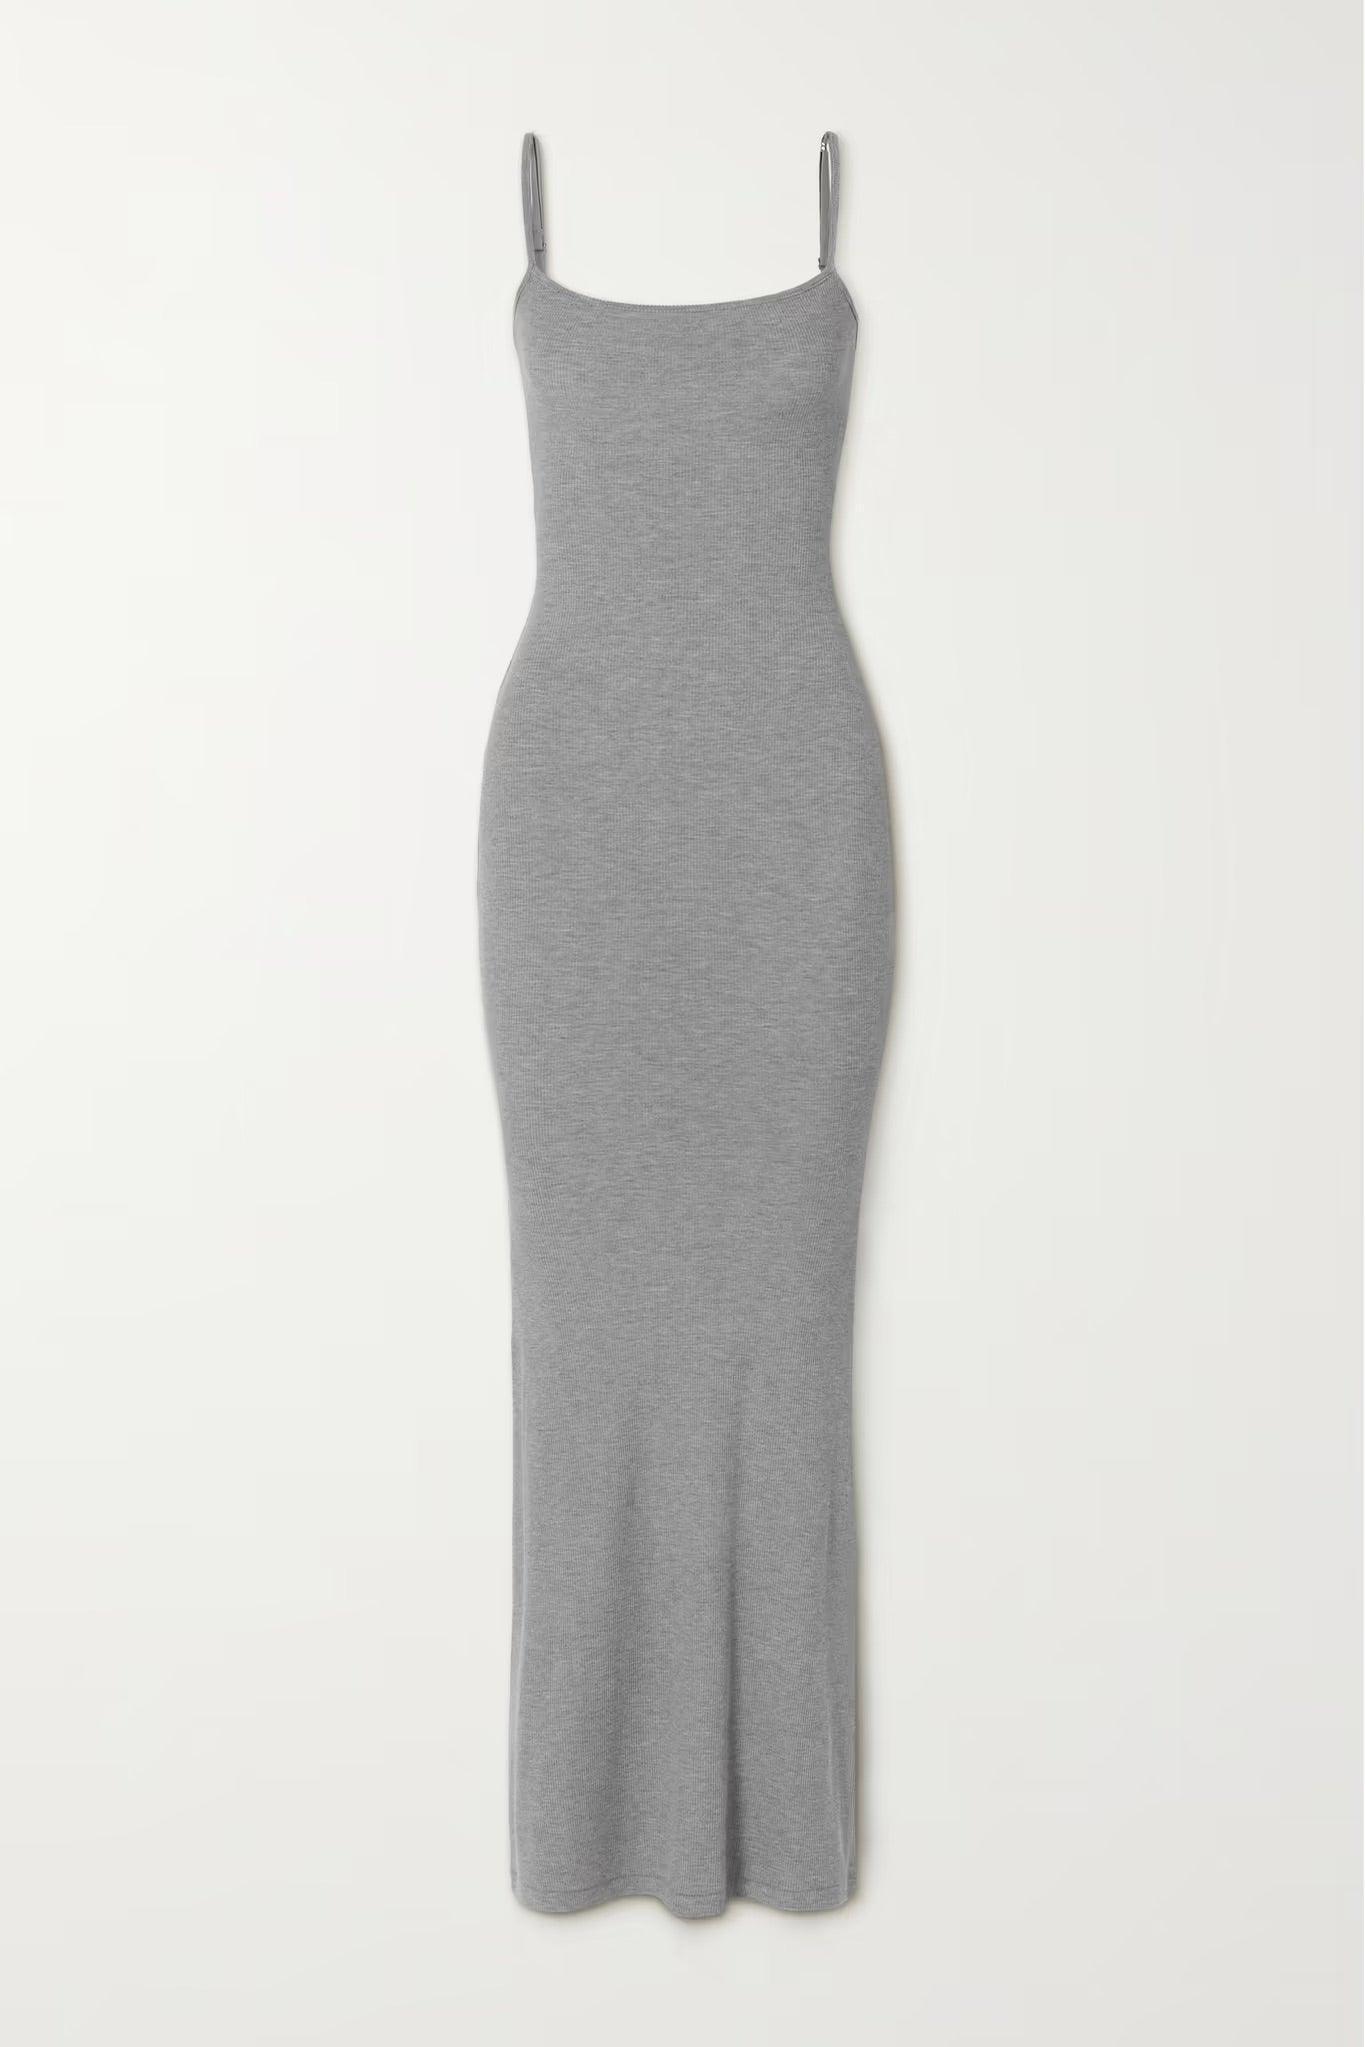 THE BODY DRESS, [product type]